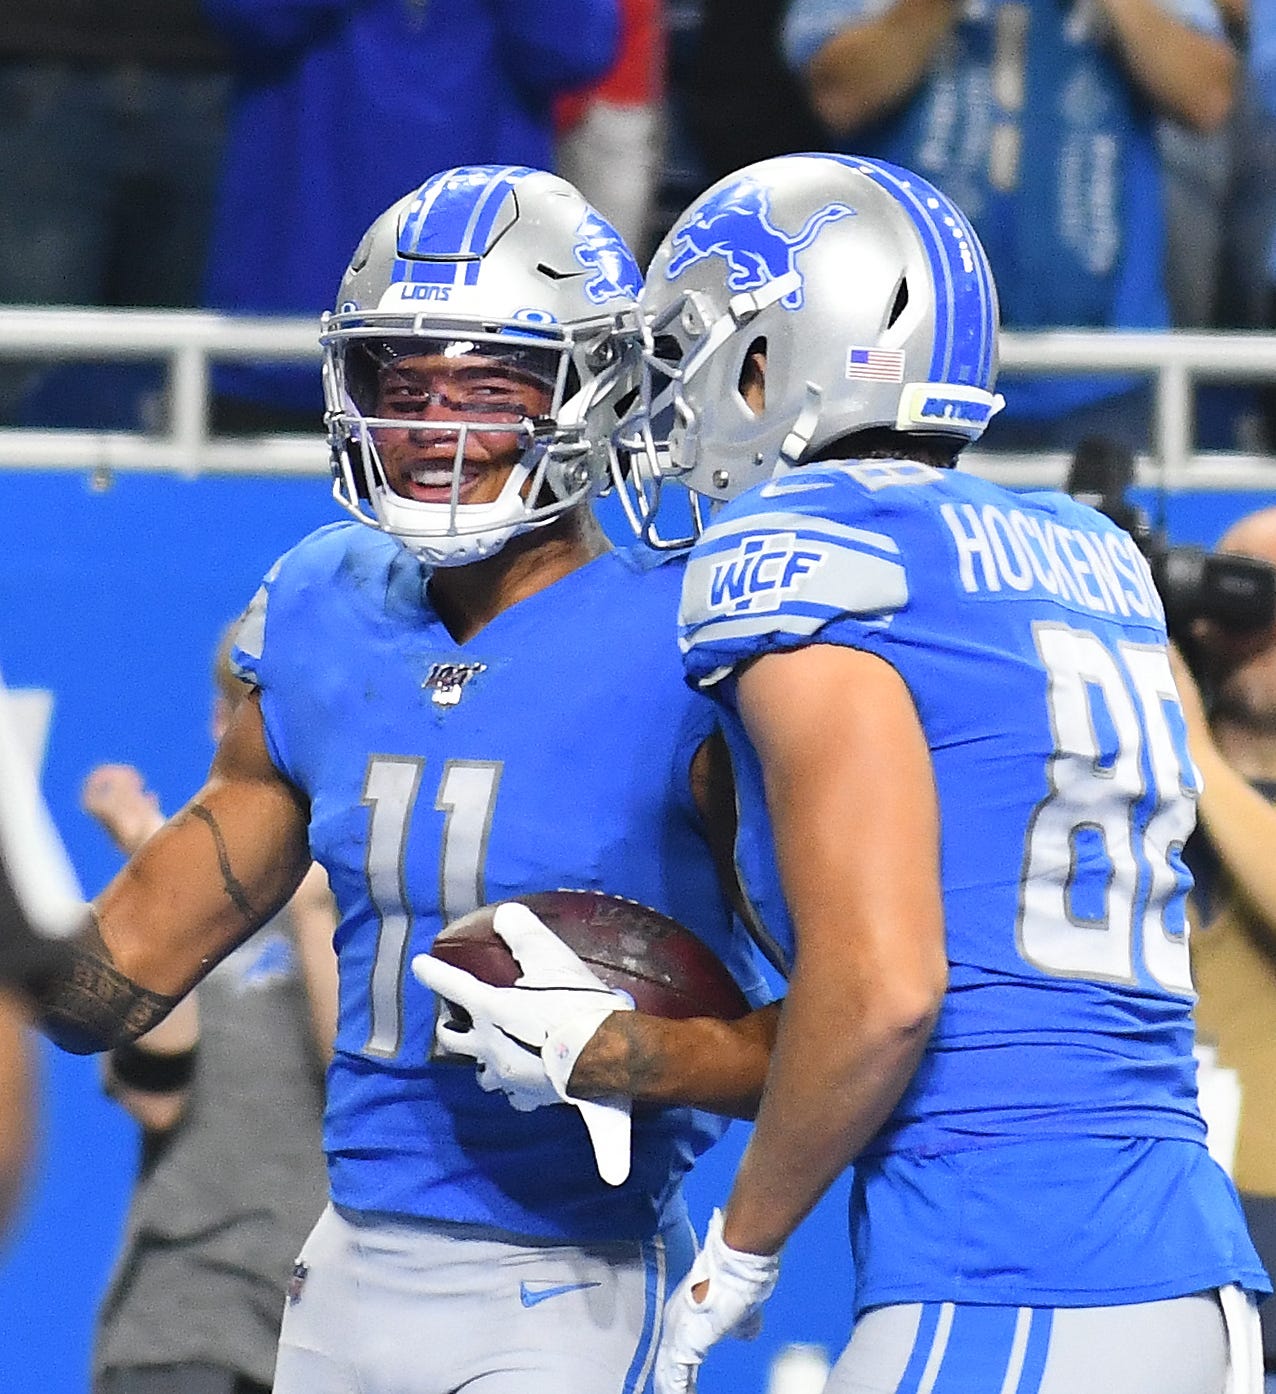 Marvin Jones, wide receiver: Prior to a season-ending ankle injury, Jones (11) was leading the Lions in receptions, while keeping pace with Kenny Golladay for the league lead in touchdown grabs. Never one to get significant separation on his routes, Jones predictably faded down the stretch with fewer than 50 yards in each of his final four games. That’s a product of inexperienced quarterbacks less confident to challenge small windows.  Grade: B+